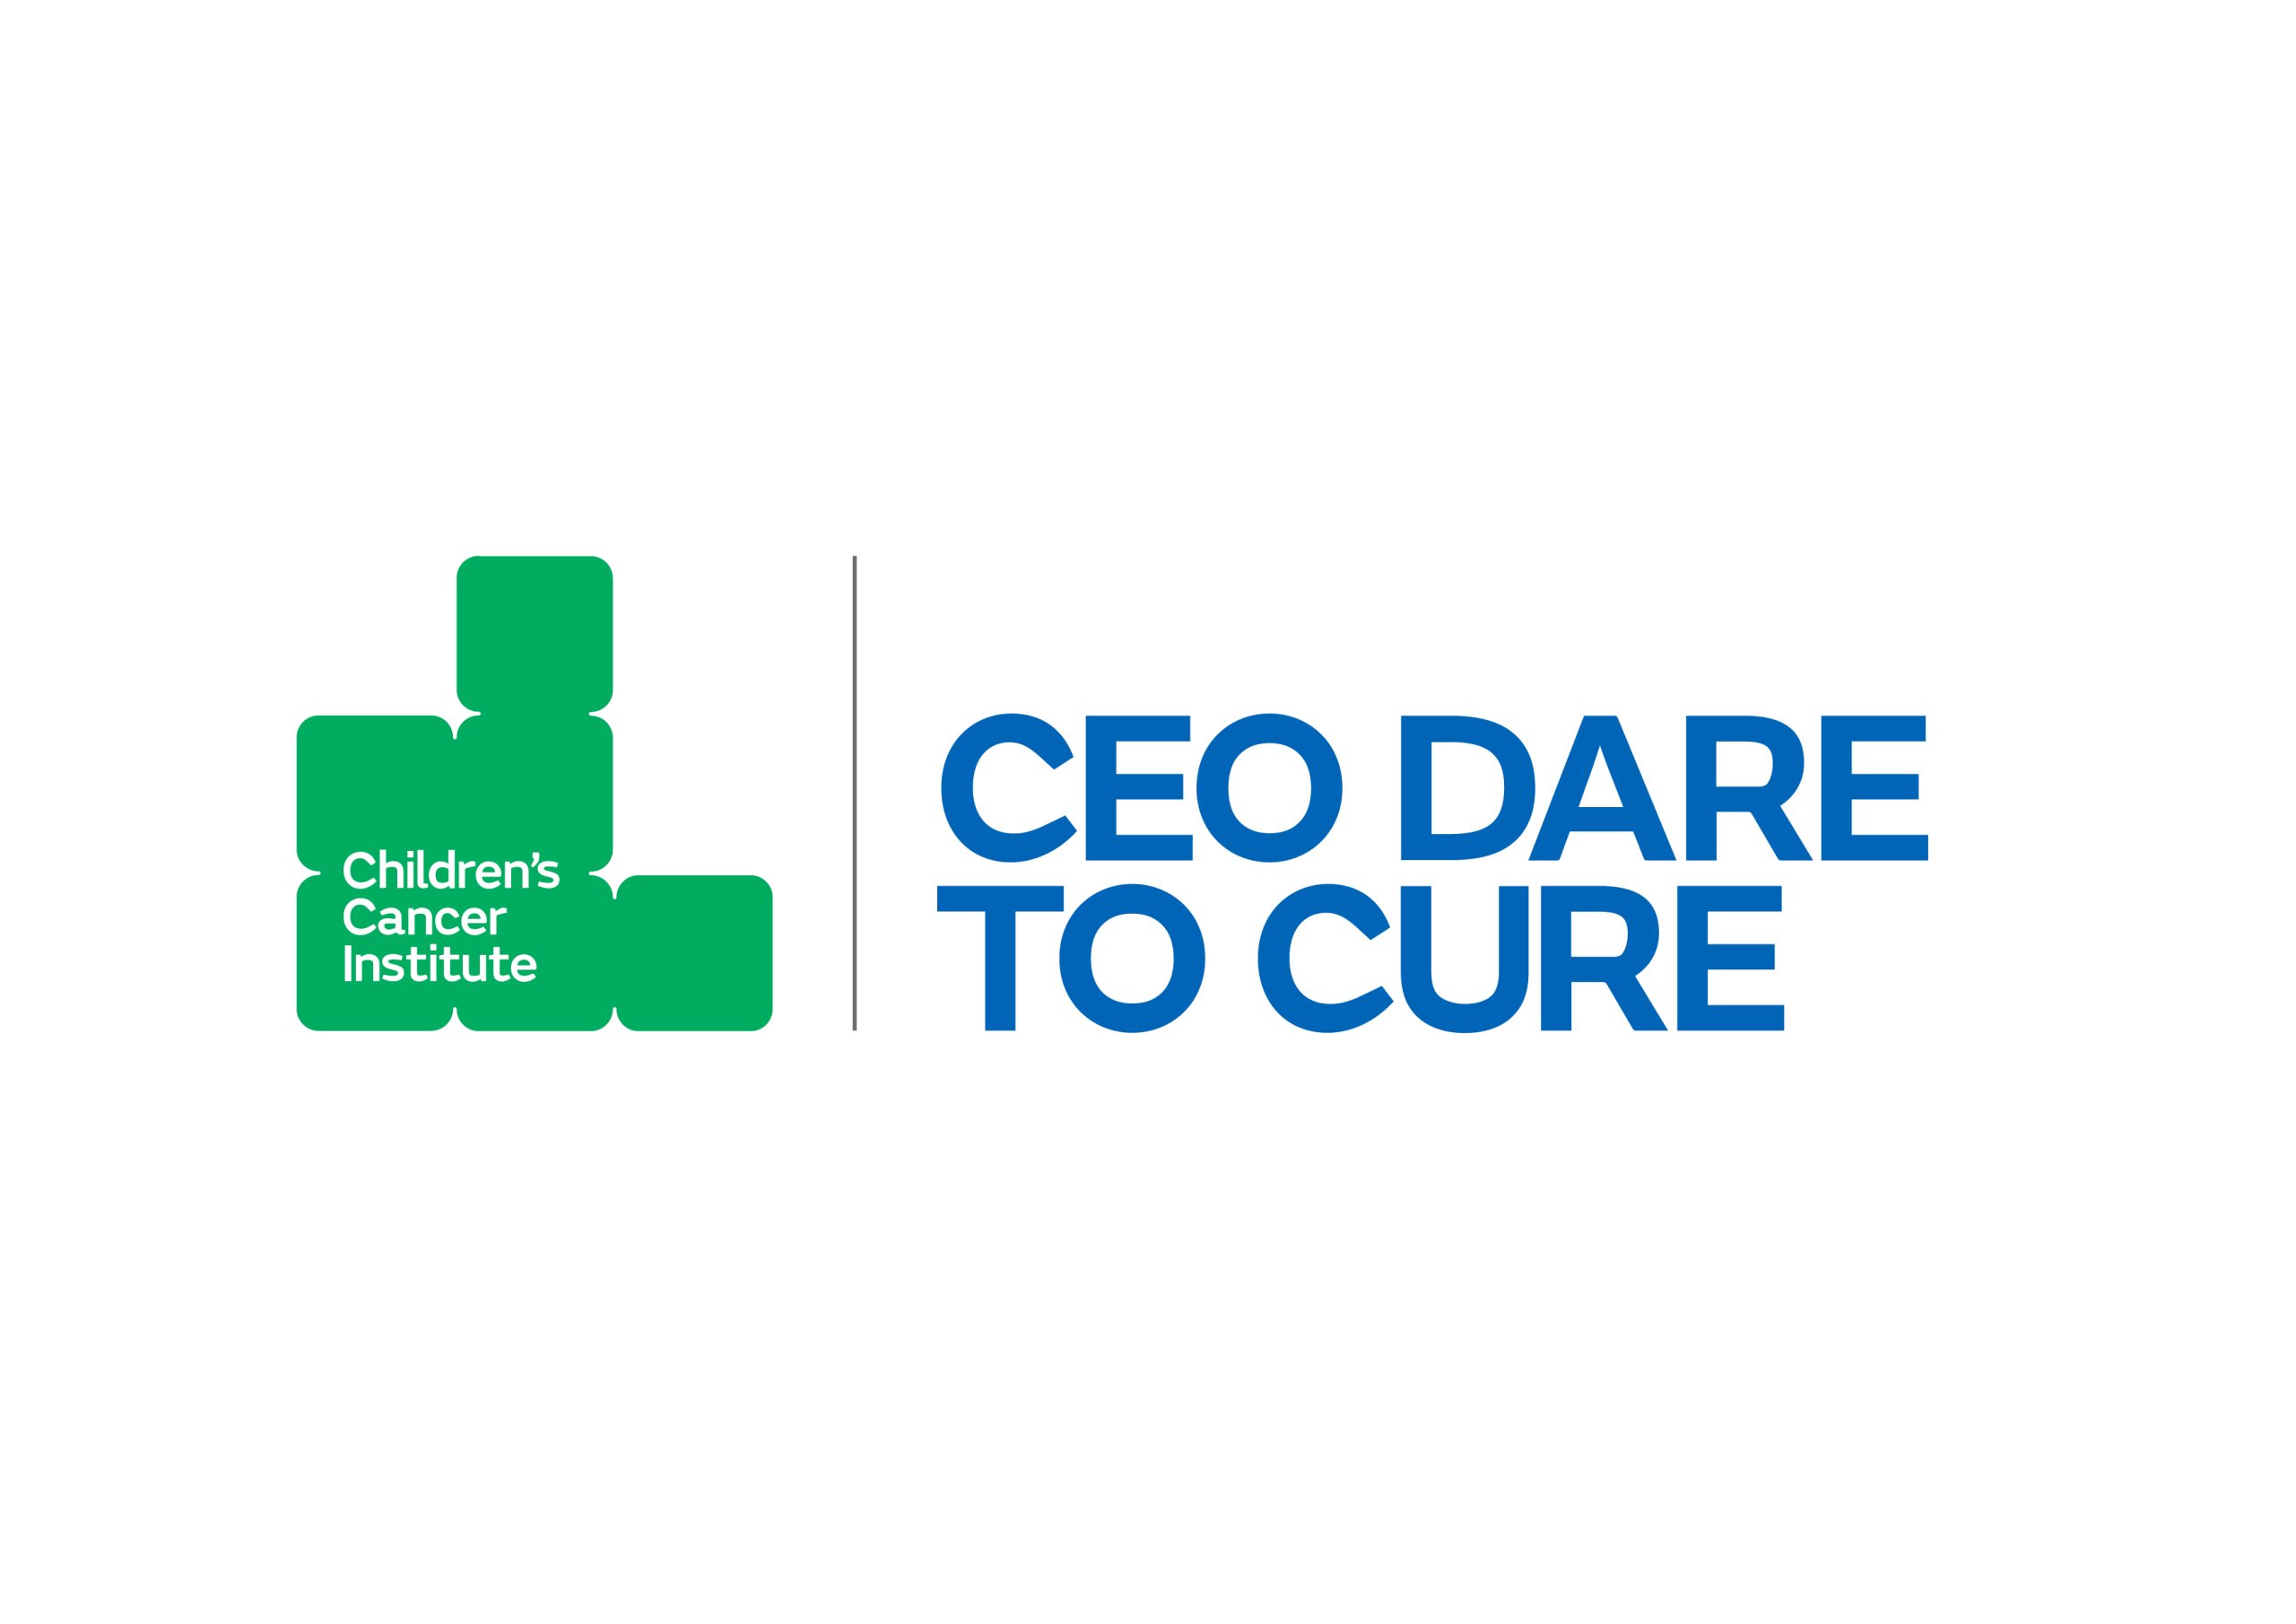 CEO Dare to Cure: A Non-Profit Organization Fighting Childhood Cancer